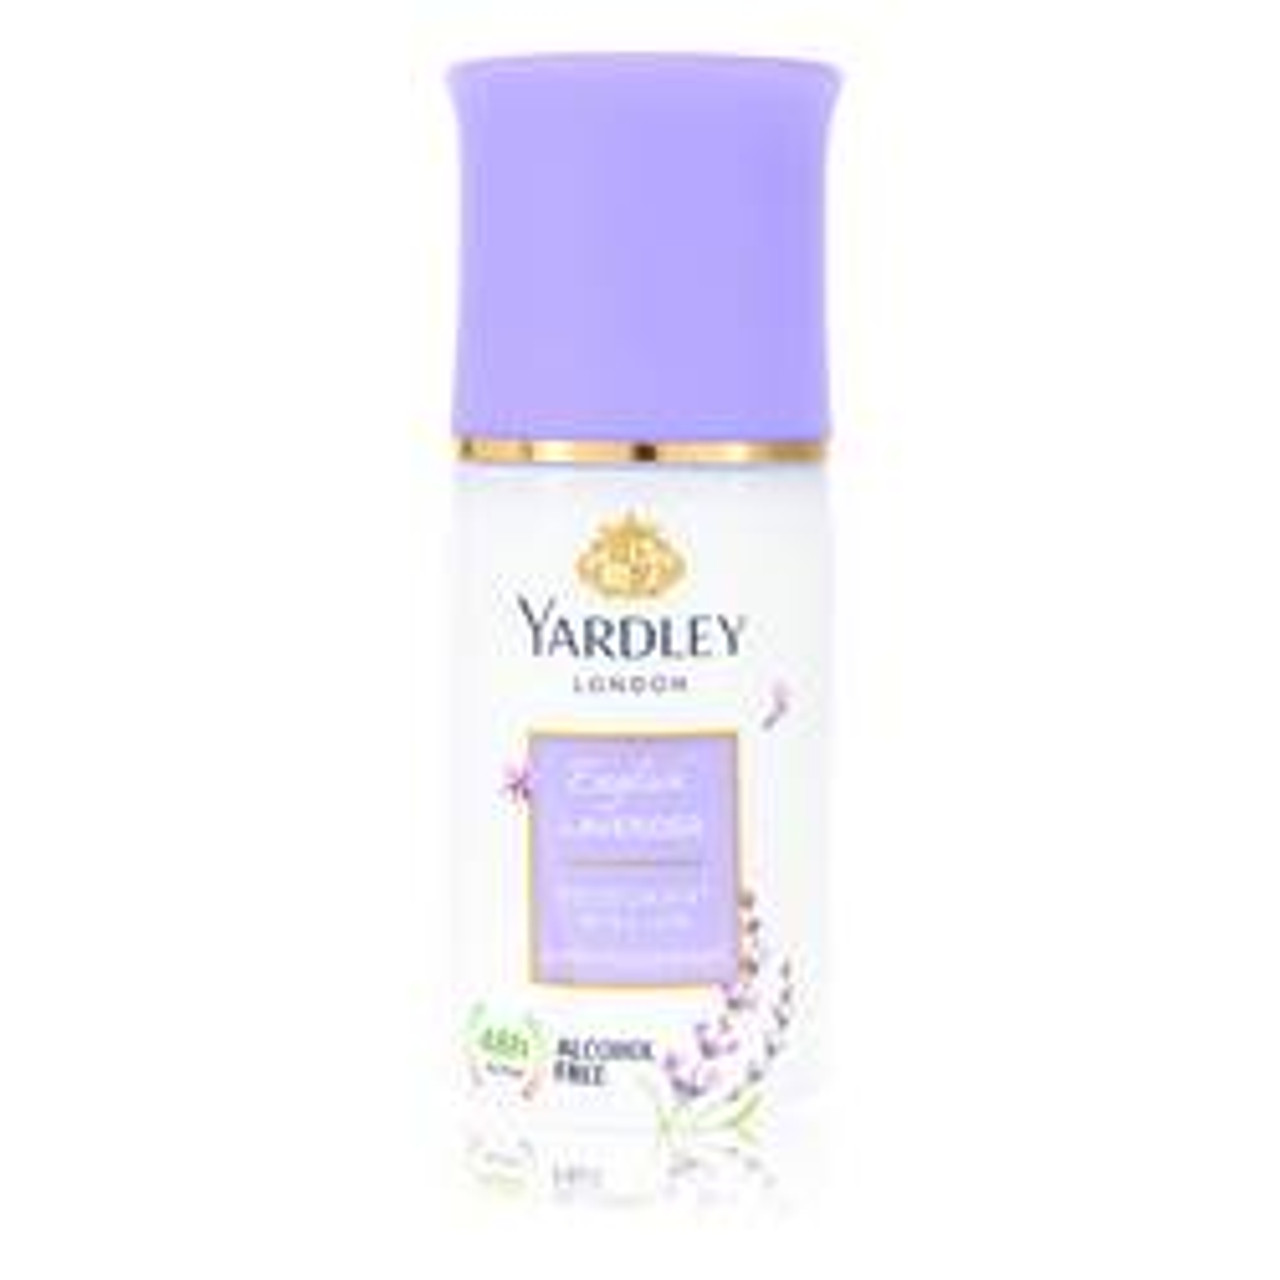 English Lavender Perfume By Yardley London Deodorant Roll-On 1.7 oz for Women - [From 19.00 - Choose pk Qty ] - *Ships from Miami